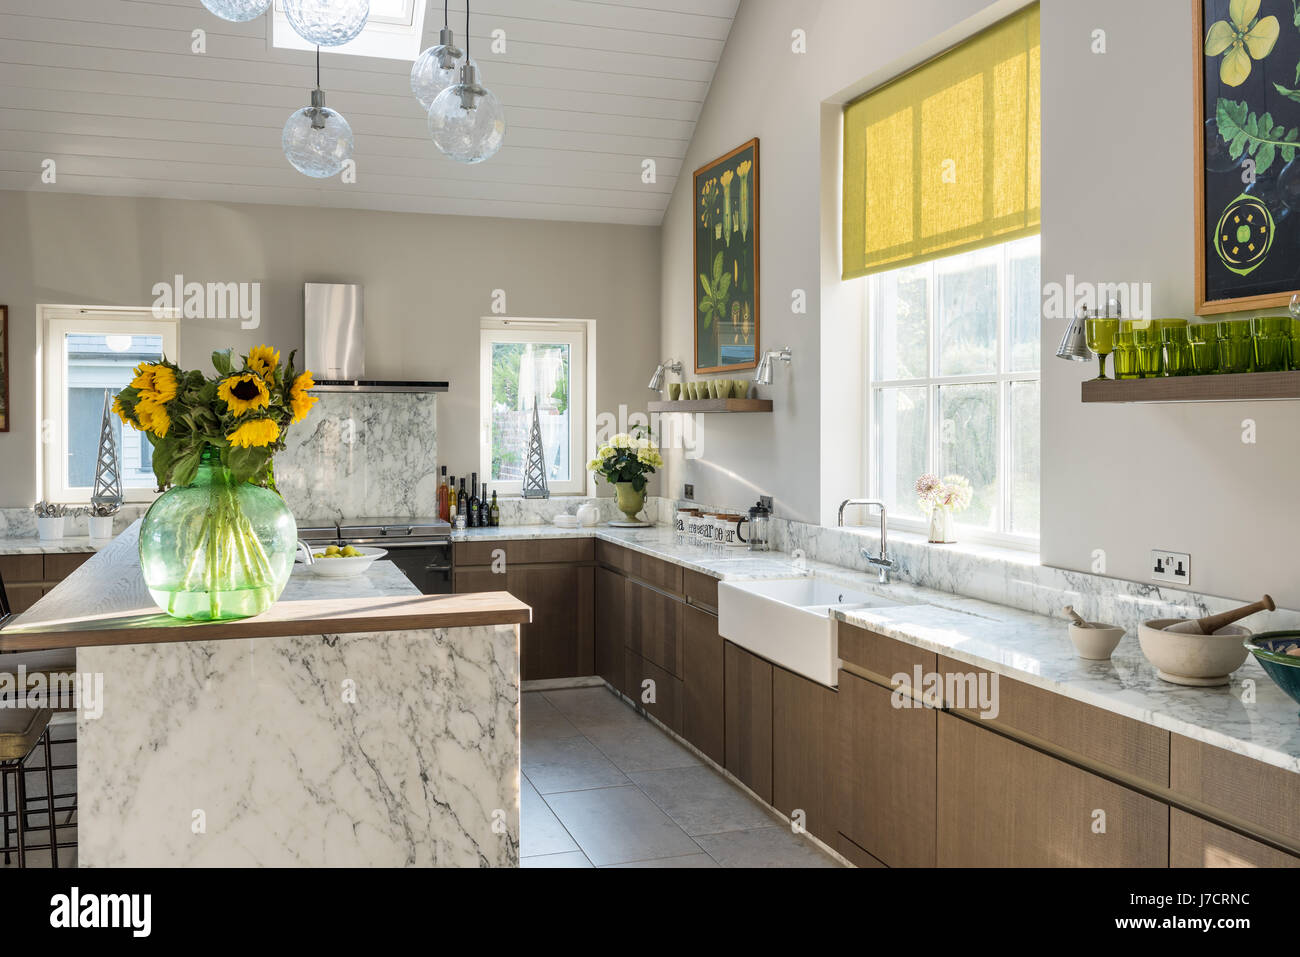 Cut sunflowers and yellow blind in marble kitchen Stock Photo